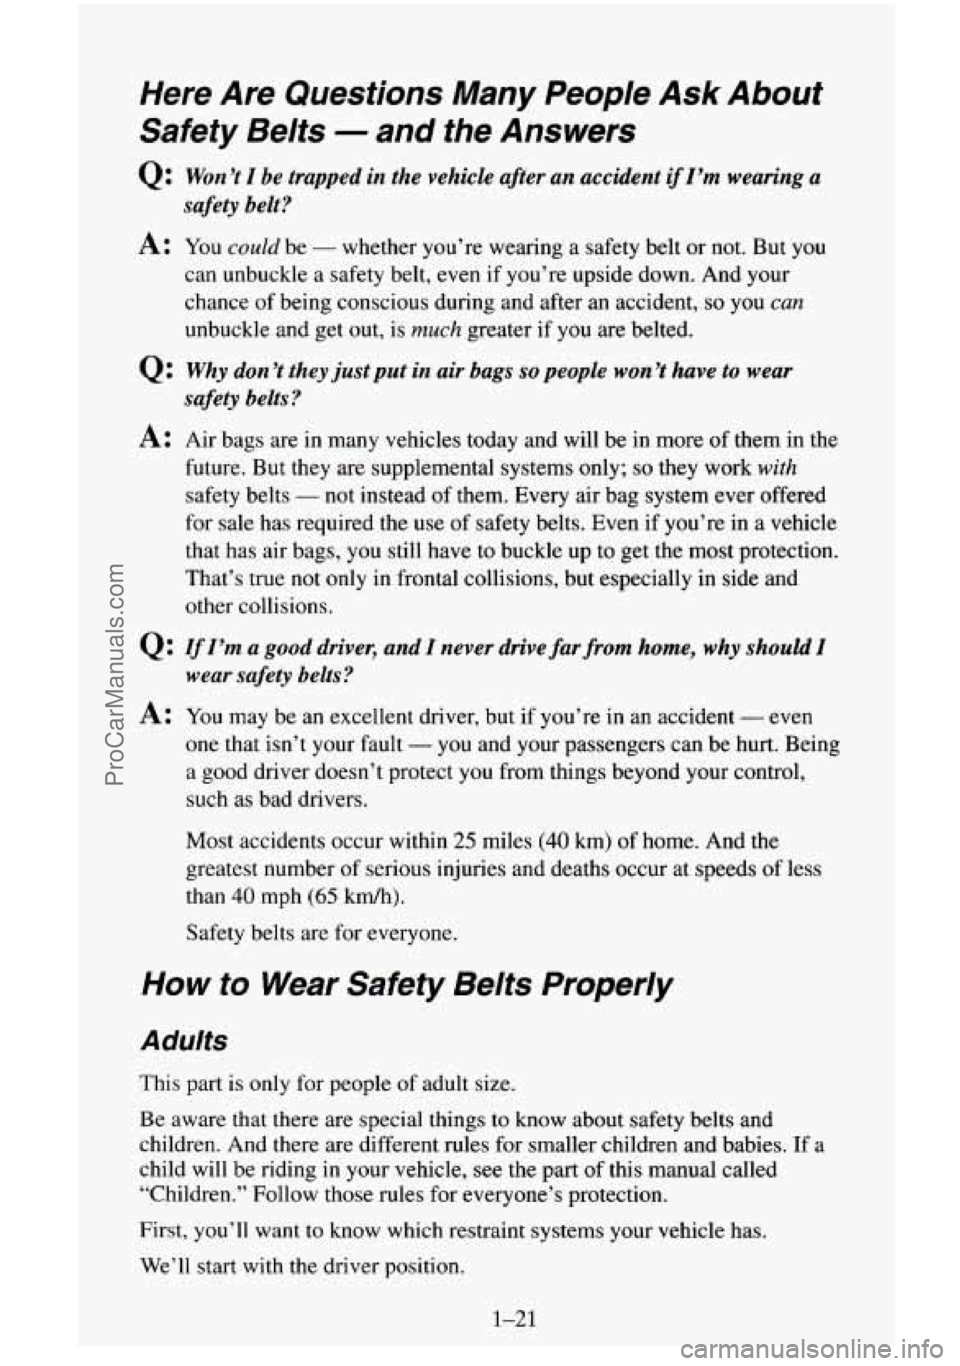 CHEVROLET SUBURBAN 1996  Owners Manual Here Are Questions  Many  People Ask About 
Safety  Belts 
- and  the  Answers 
Q: Won’t I be trapped  in the  vehicle  after  an accident if I’m wearing  a 
A: You could be - whether you’re wea